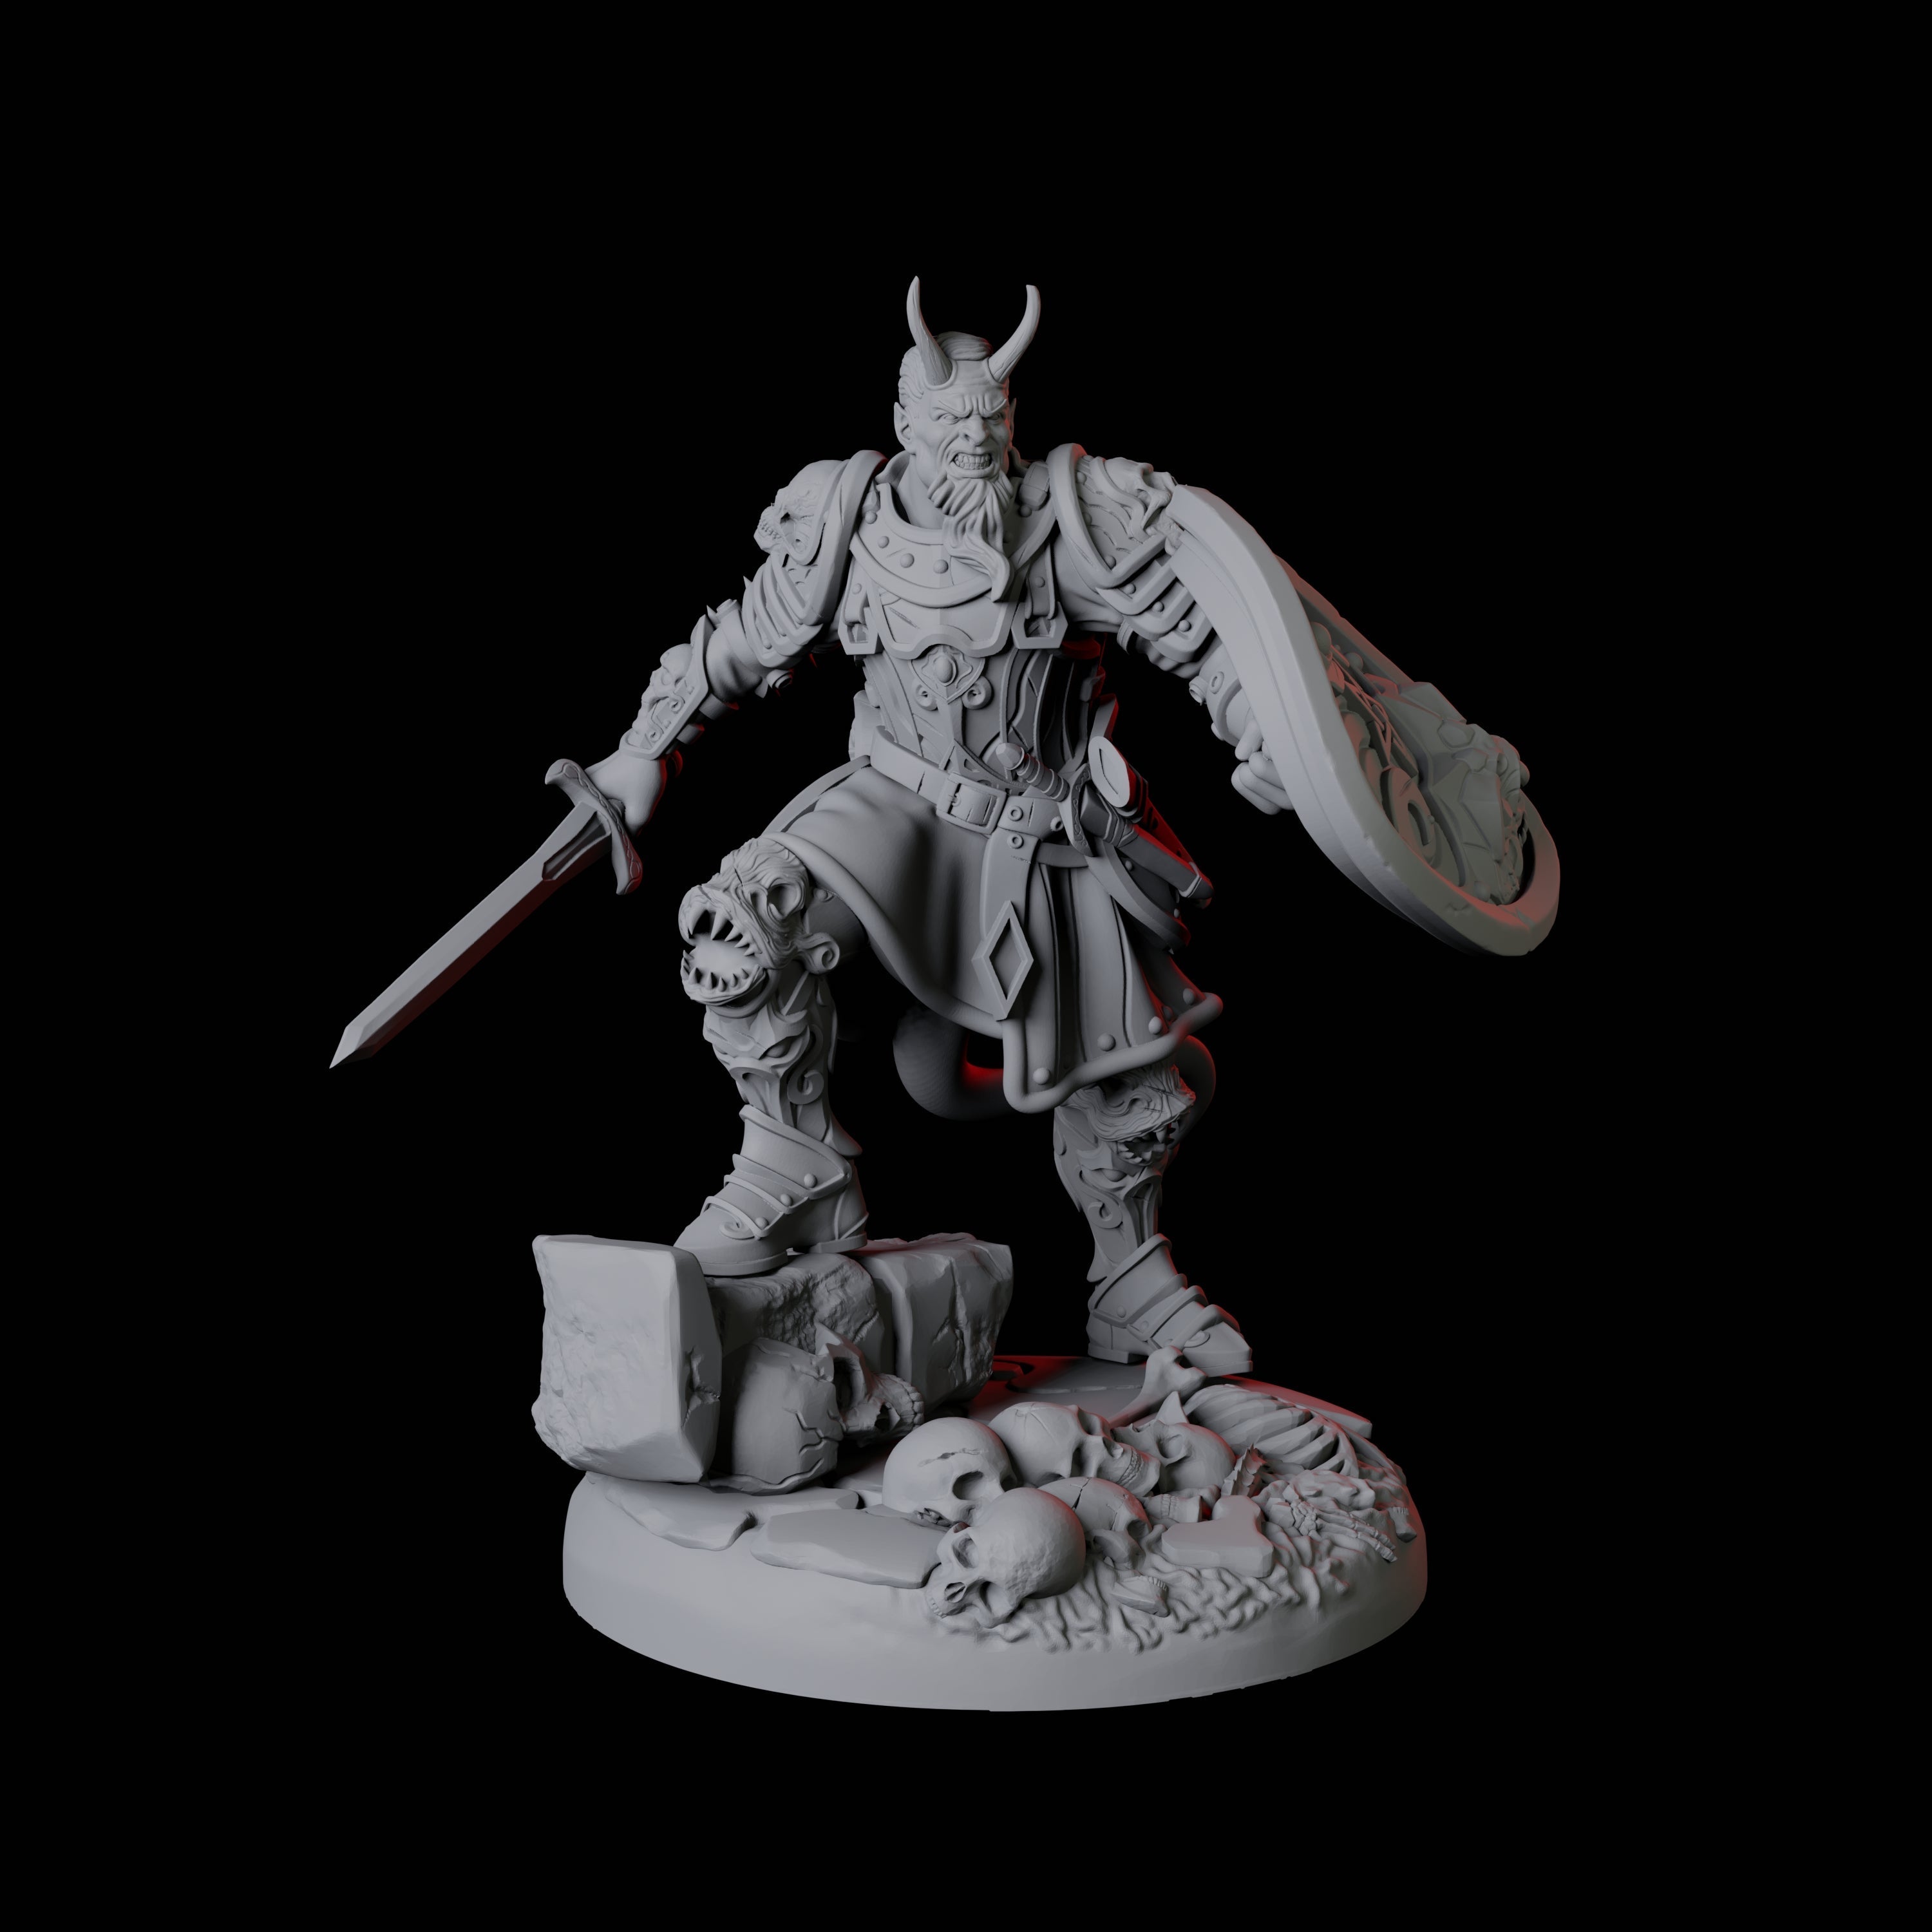 Four Threatening Bearded Devils Miniature for Dungeons and Dragons, Pathfinder or other TTRPGs